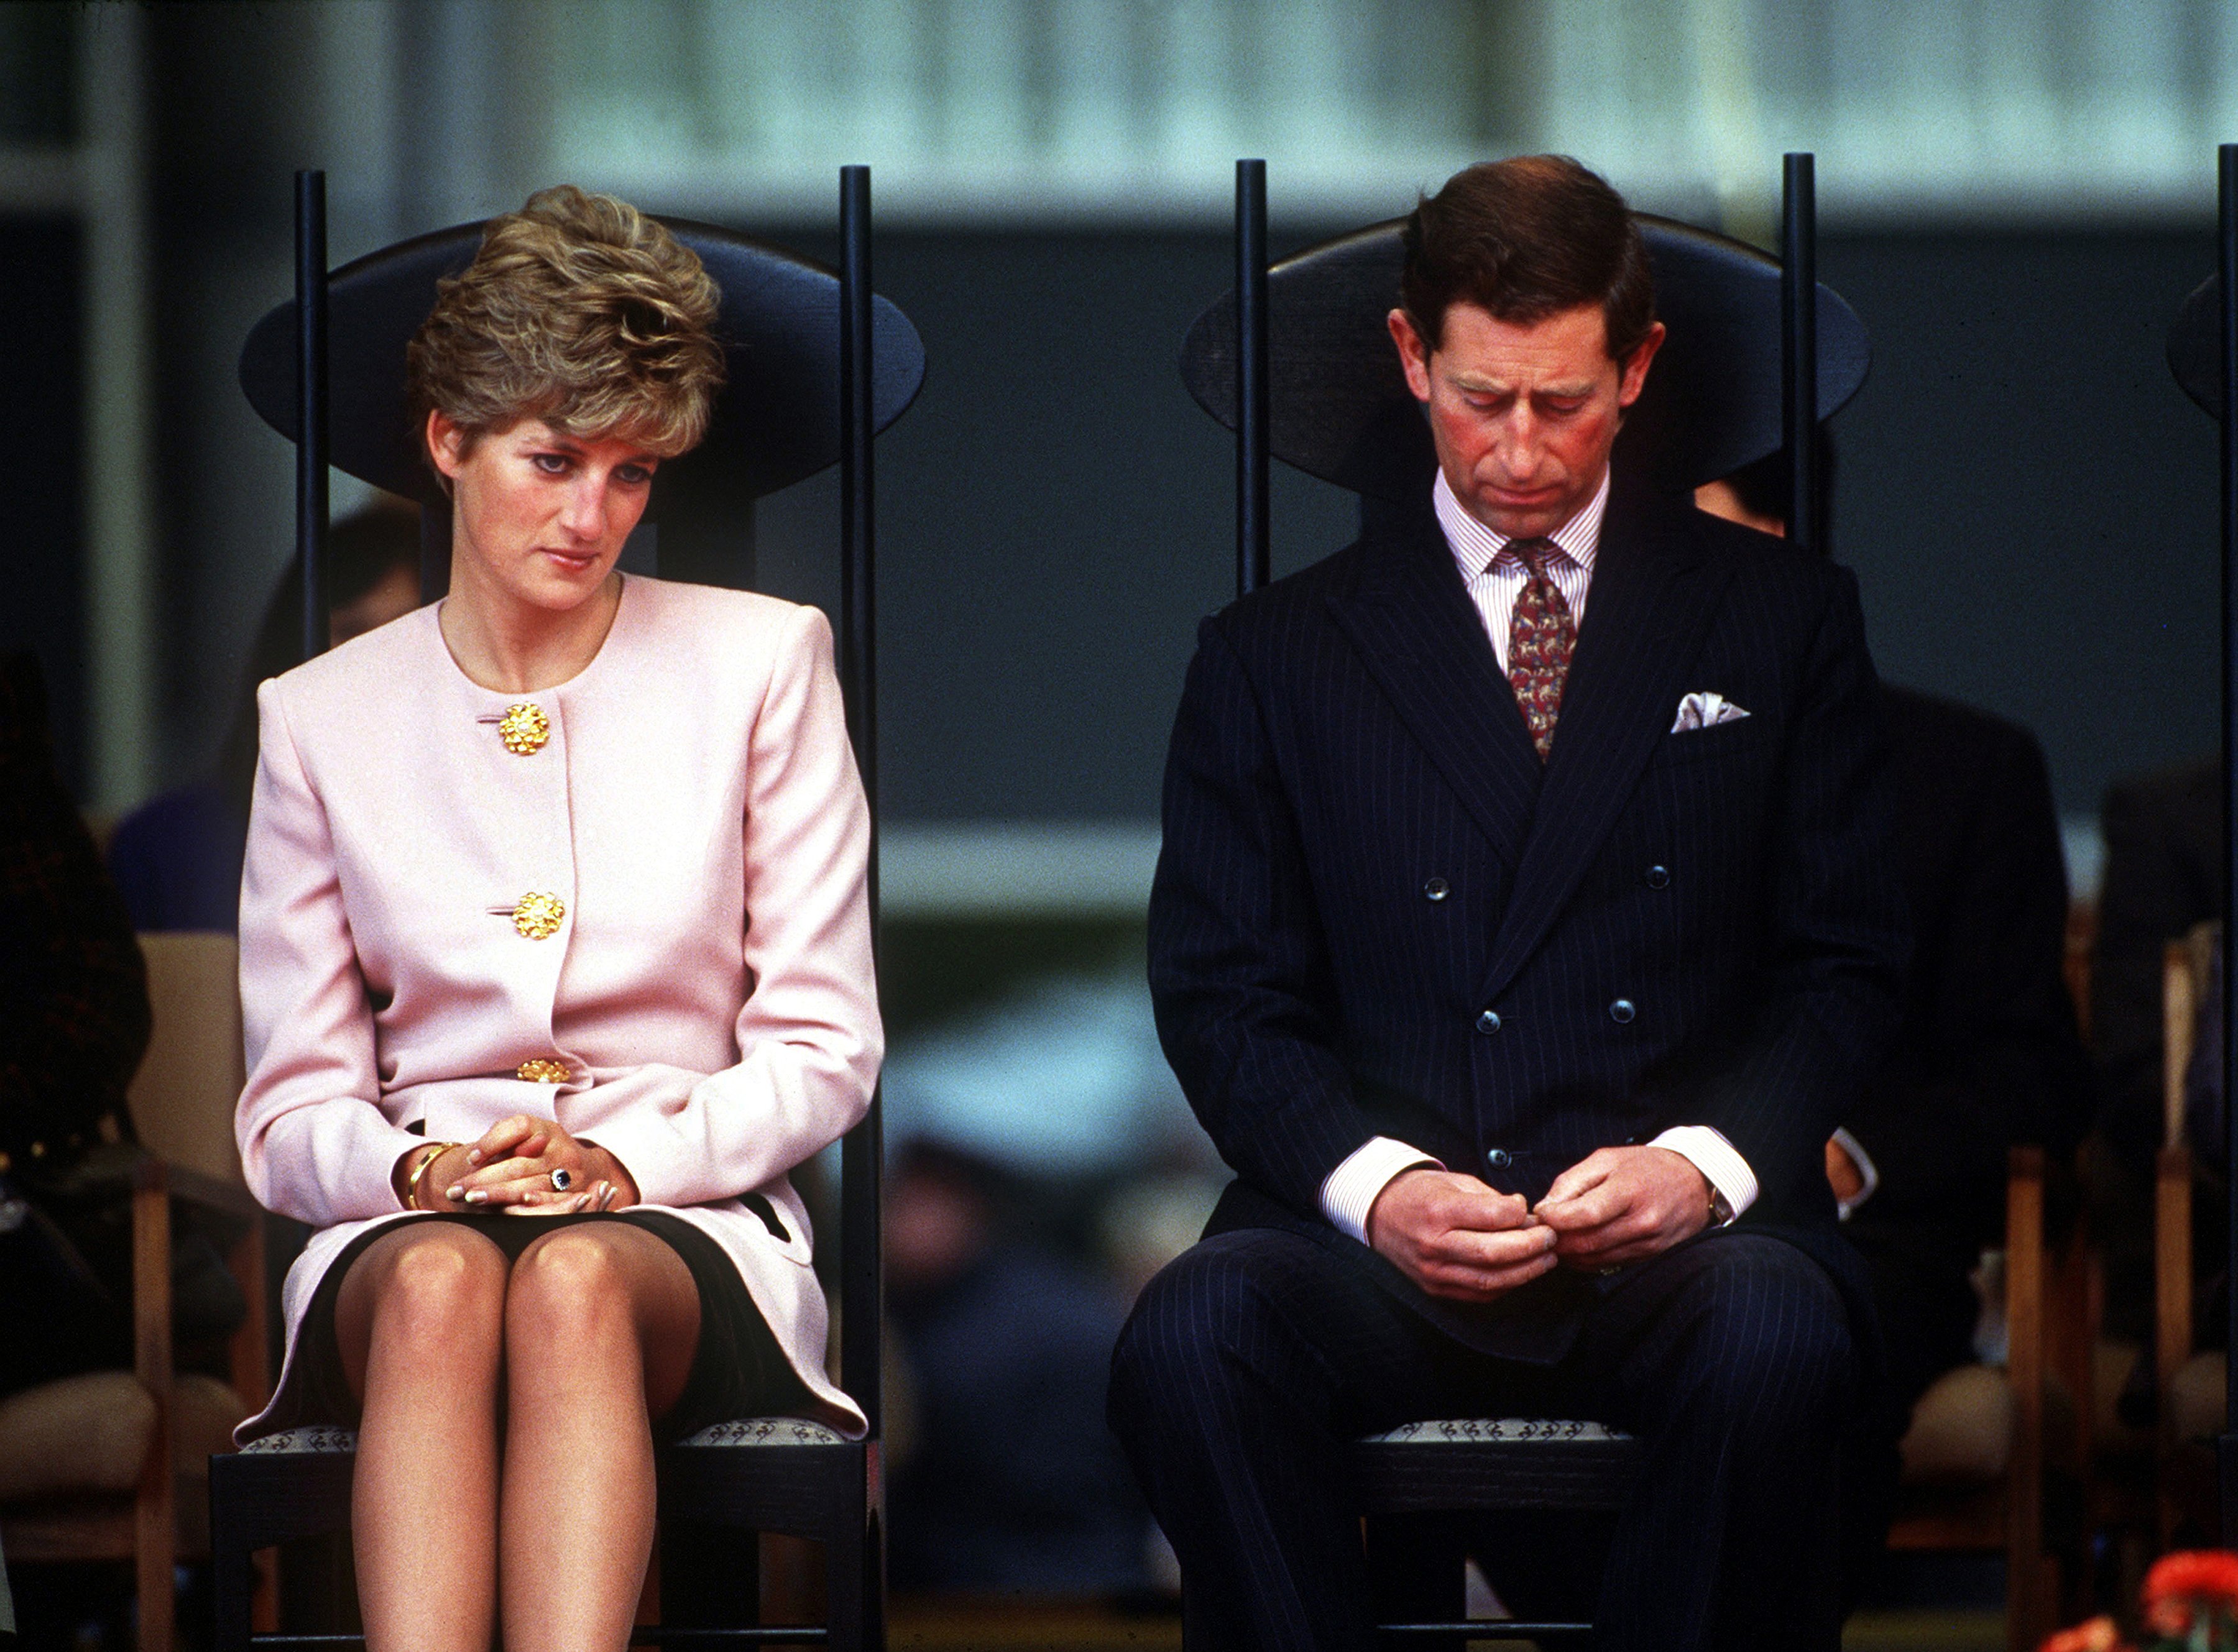 Prince Charles and Princess Diana attending a welcome ceremony in October 1991, in Toronto, Canada ┃Source: Getty Images